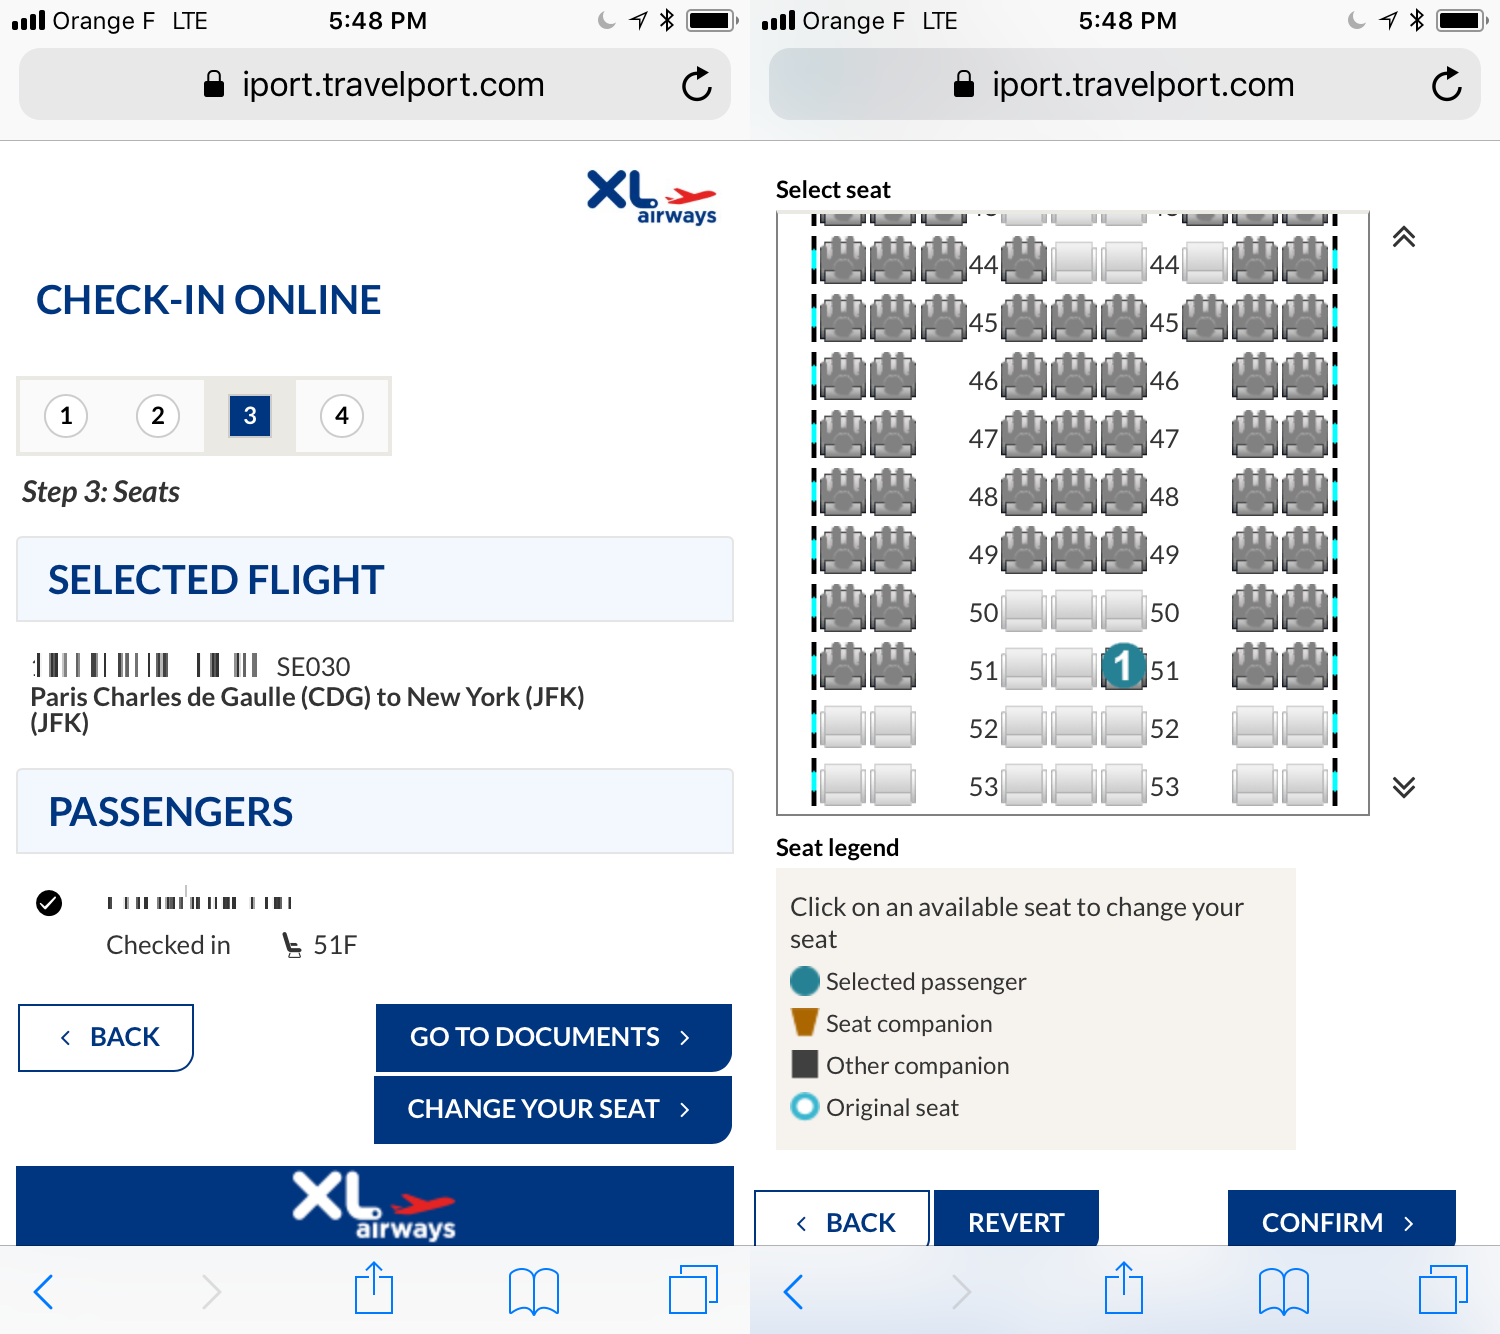 Flight Review: XL Airways Economy (A330-300) from Paris